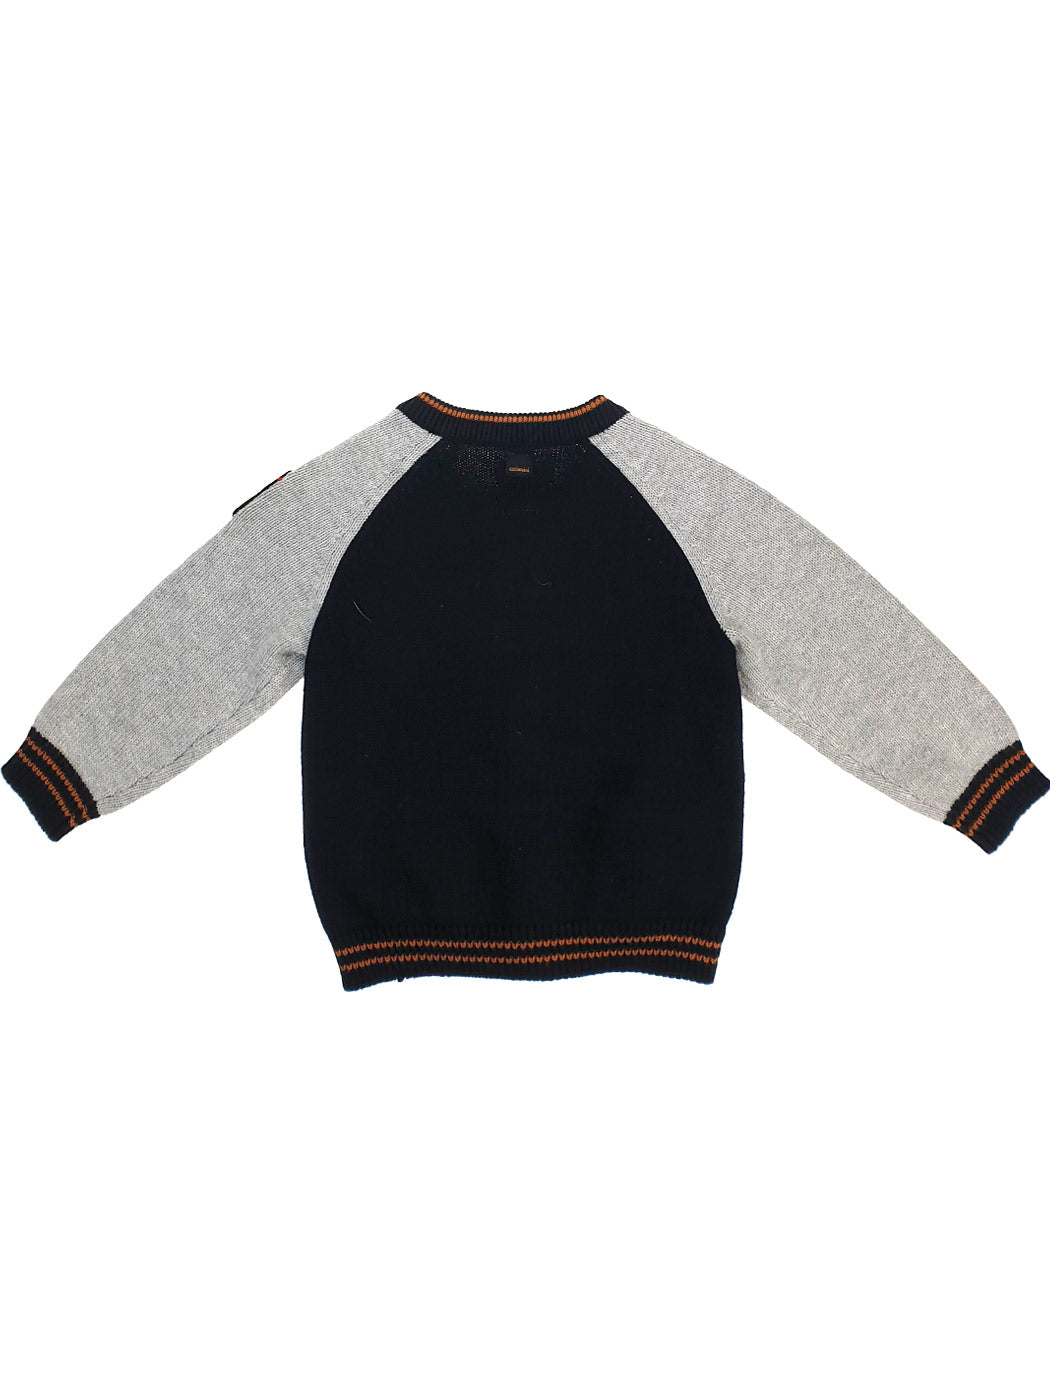 Baby knitted cardigan-CM18022